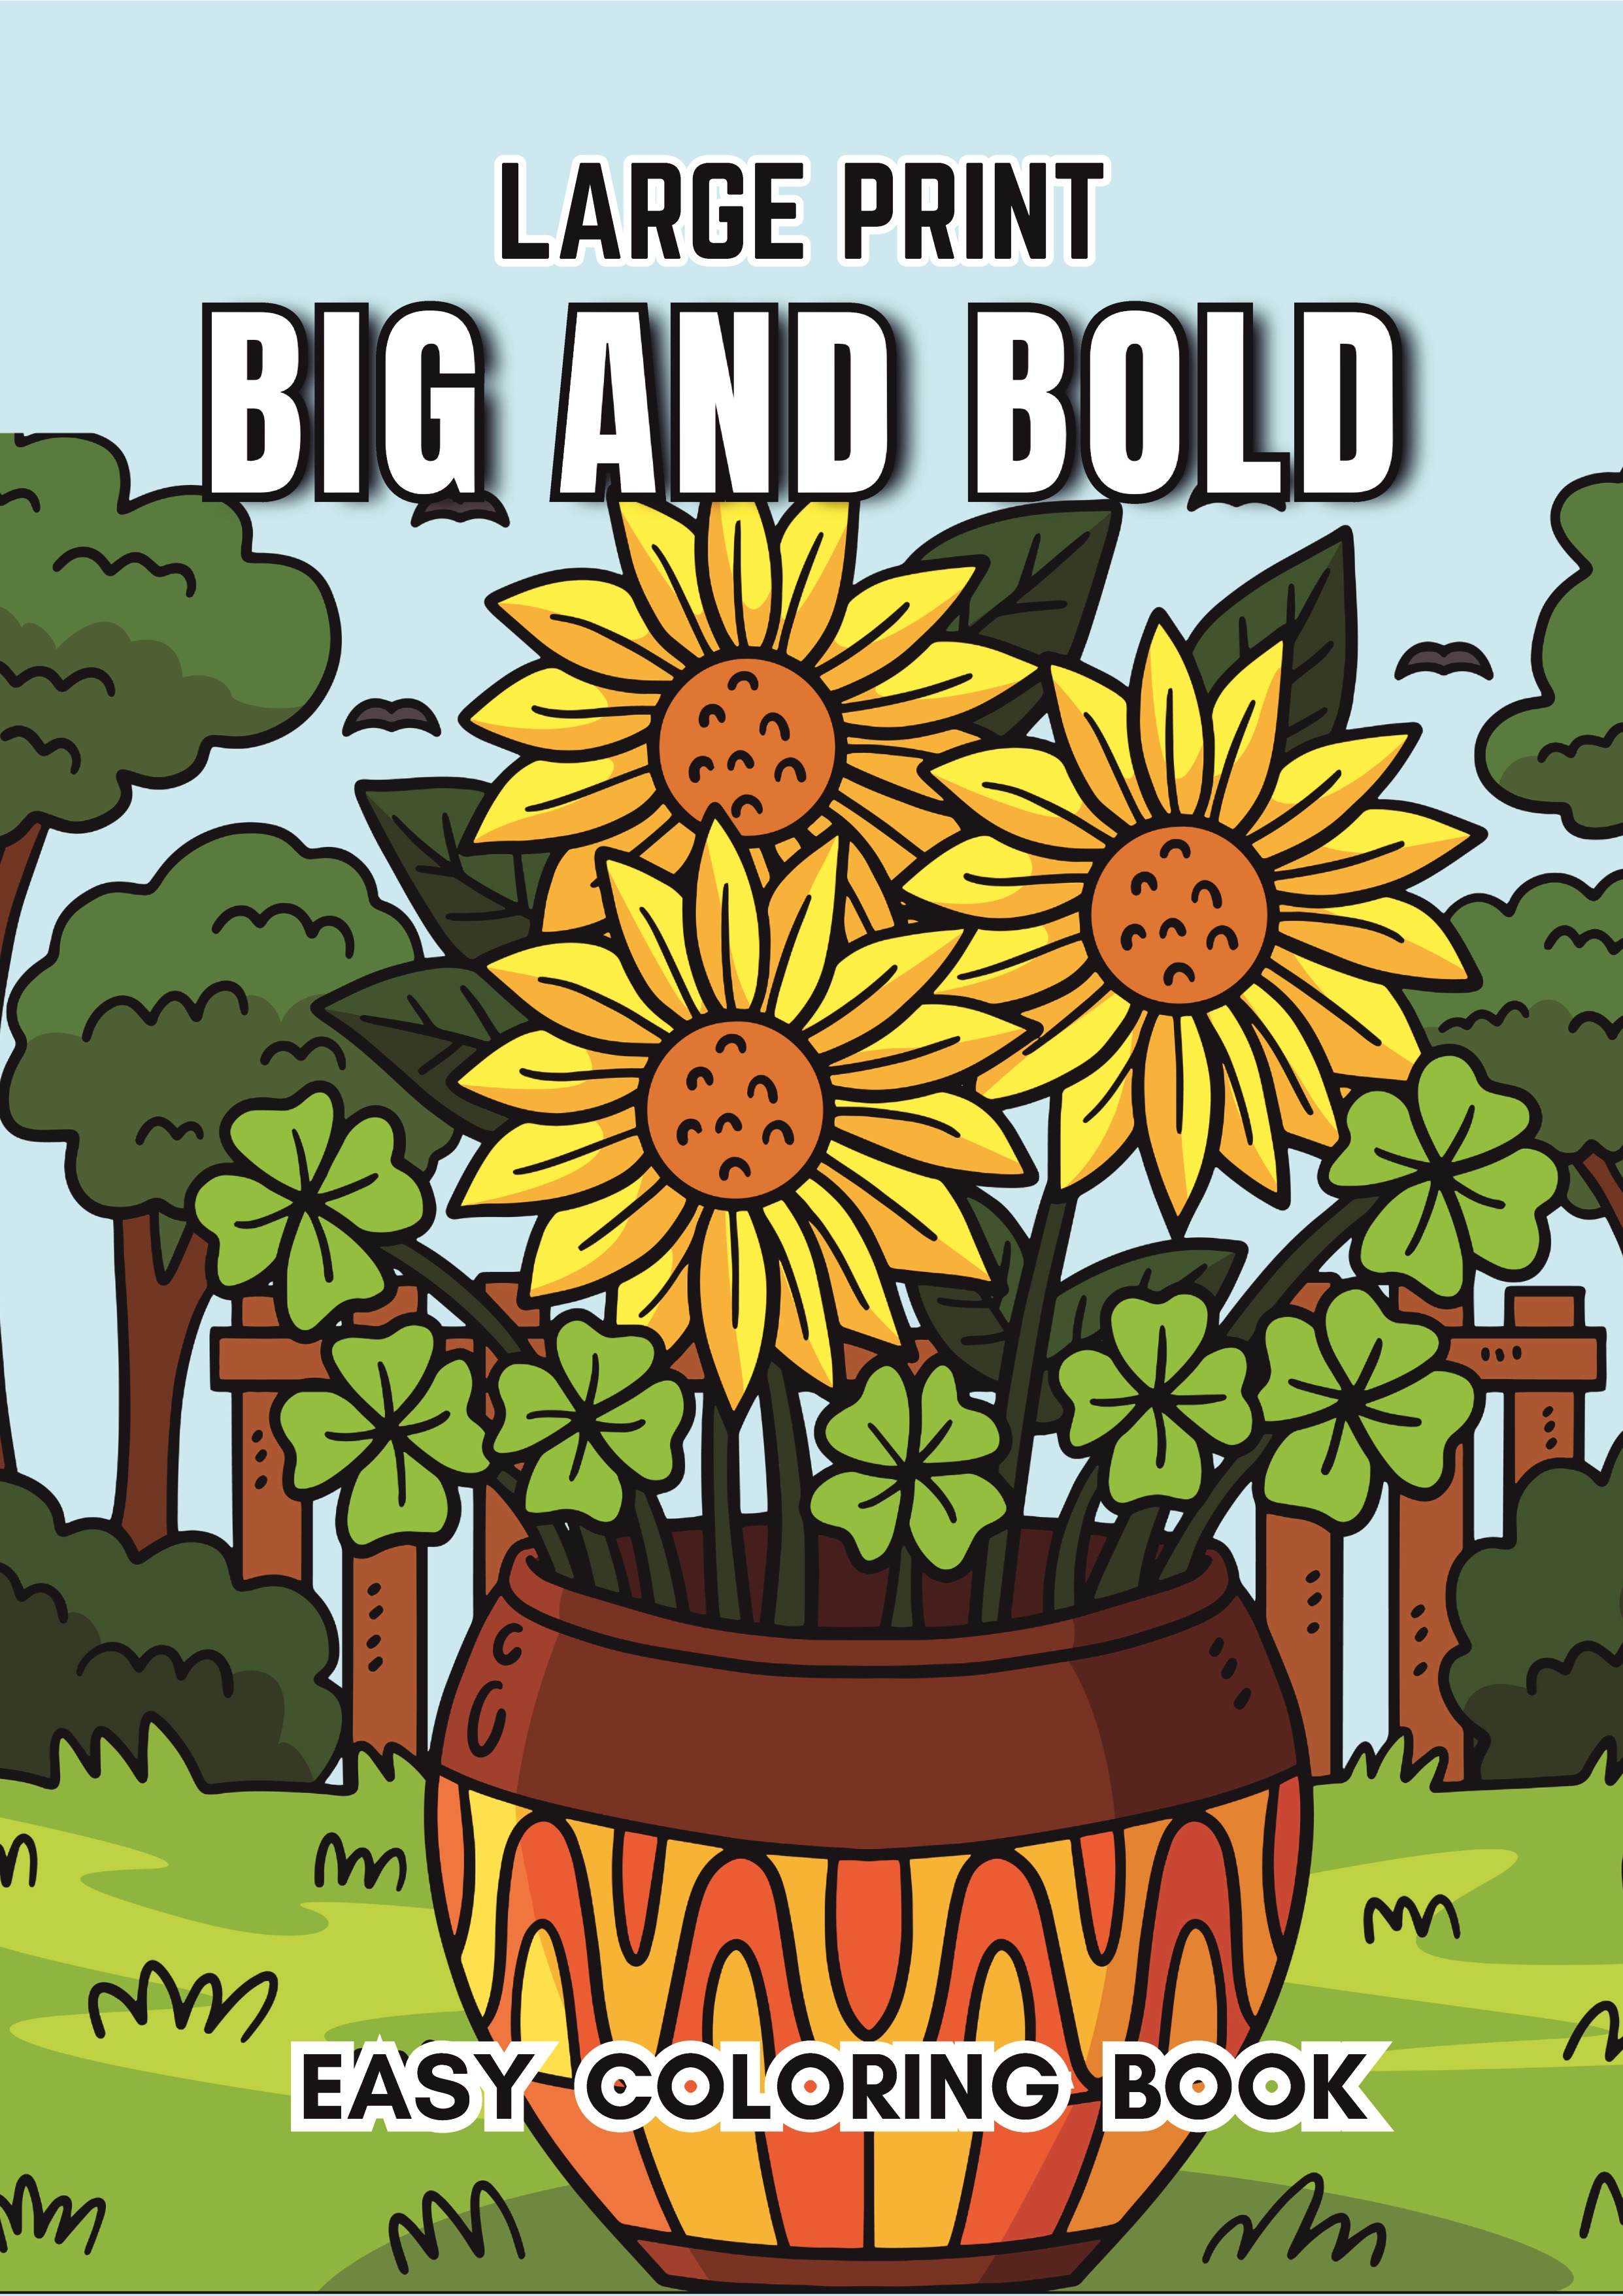 Big and bold easy coloring book a simple large print book featuring designs for adults beginners seniors mandalas food flowers and more